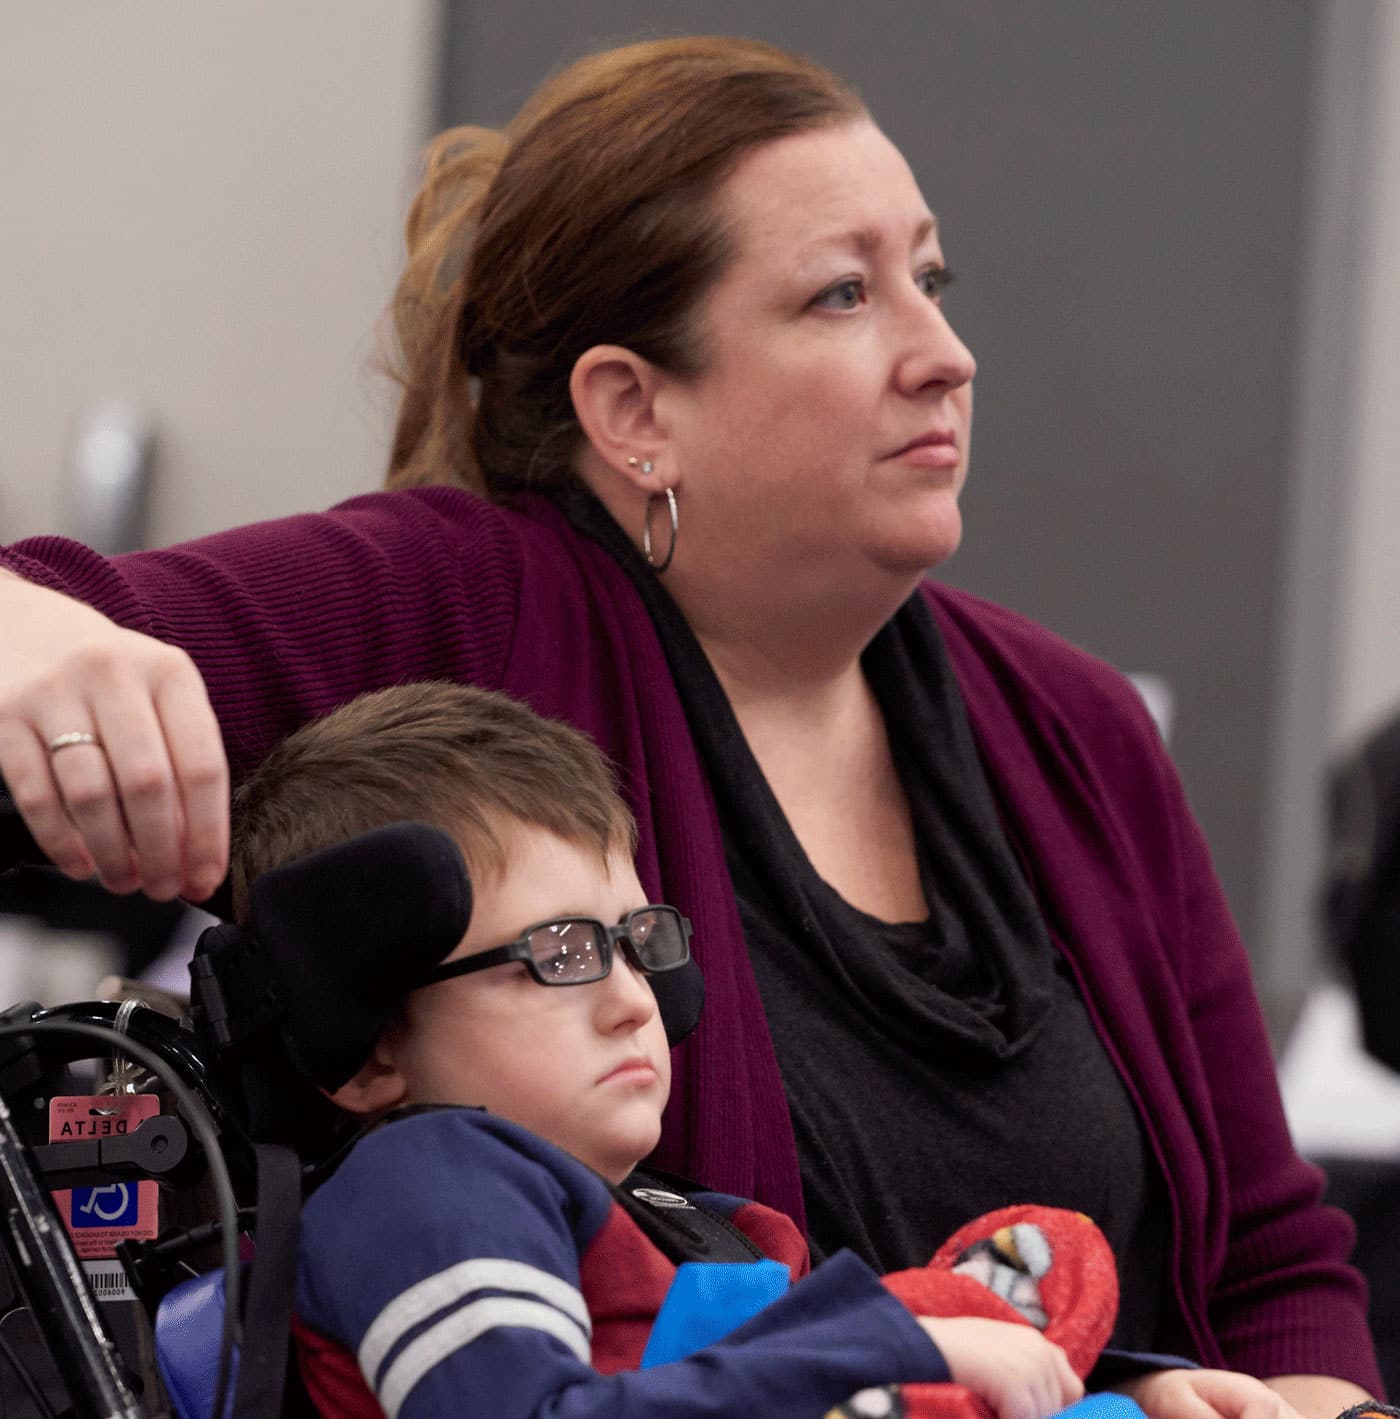 A woman in a maroon sweater leans an arm over her young son's wheelchair, listening intently to someone off camera.